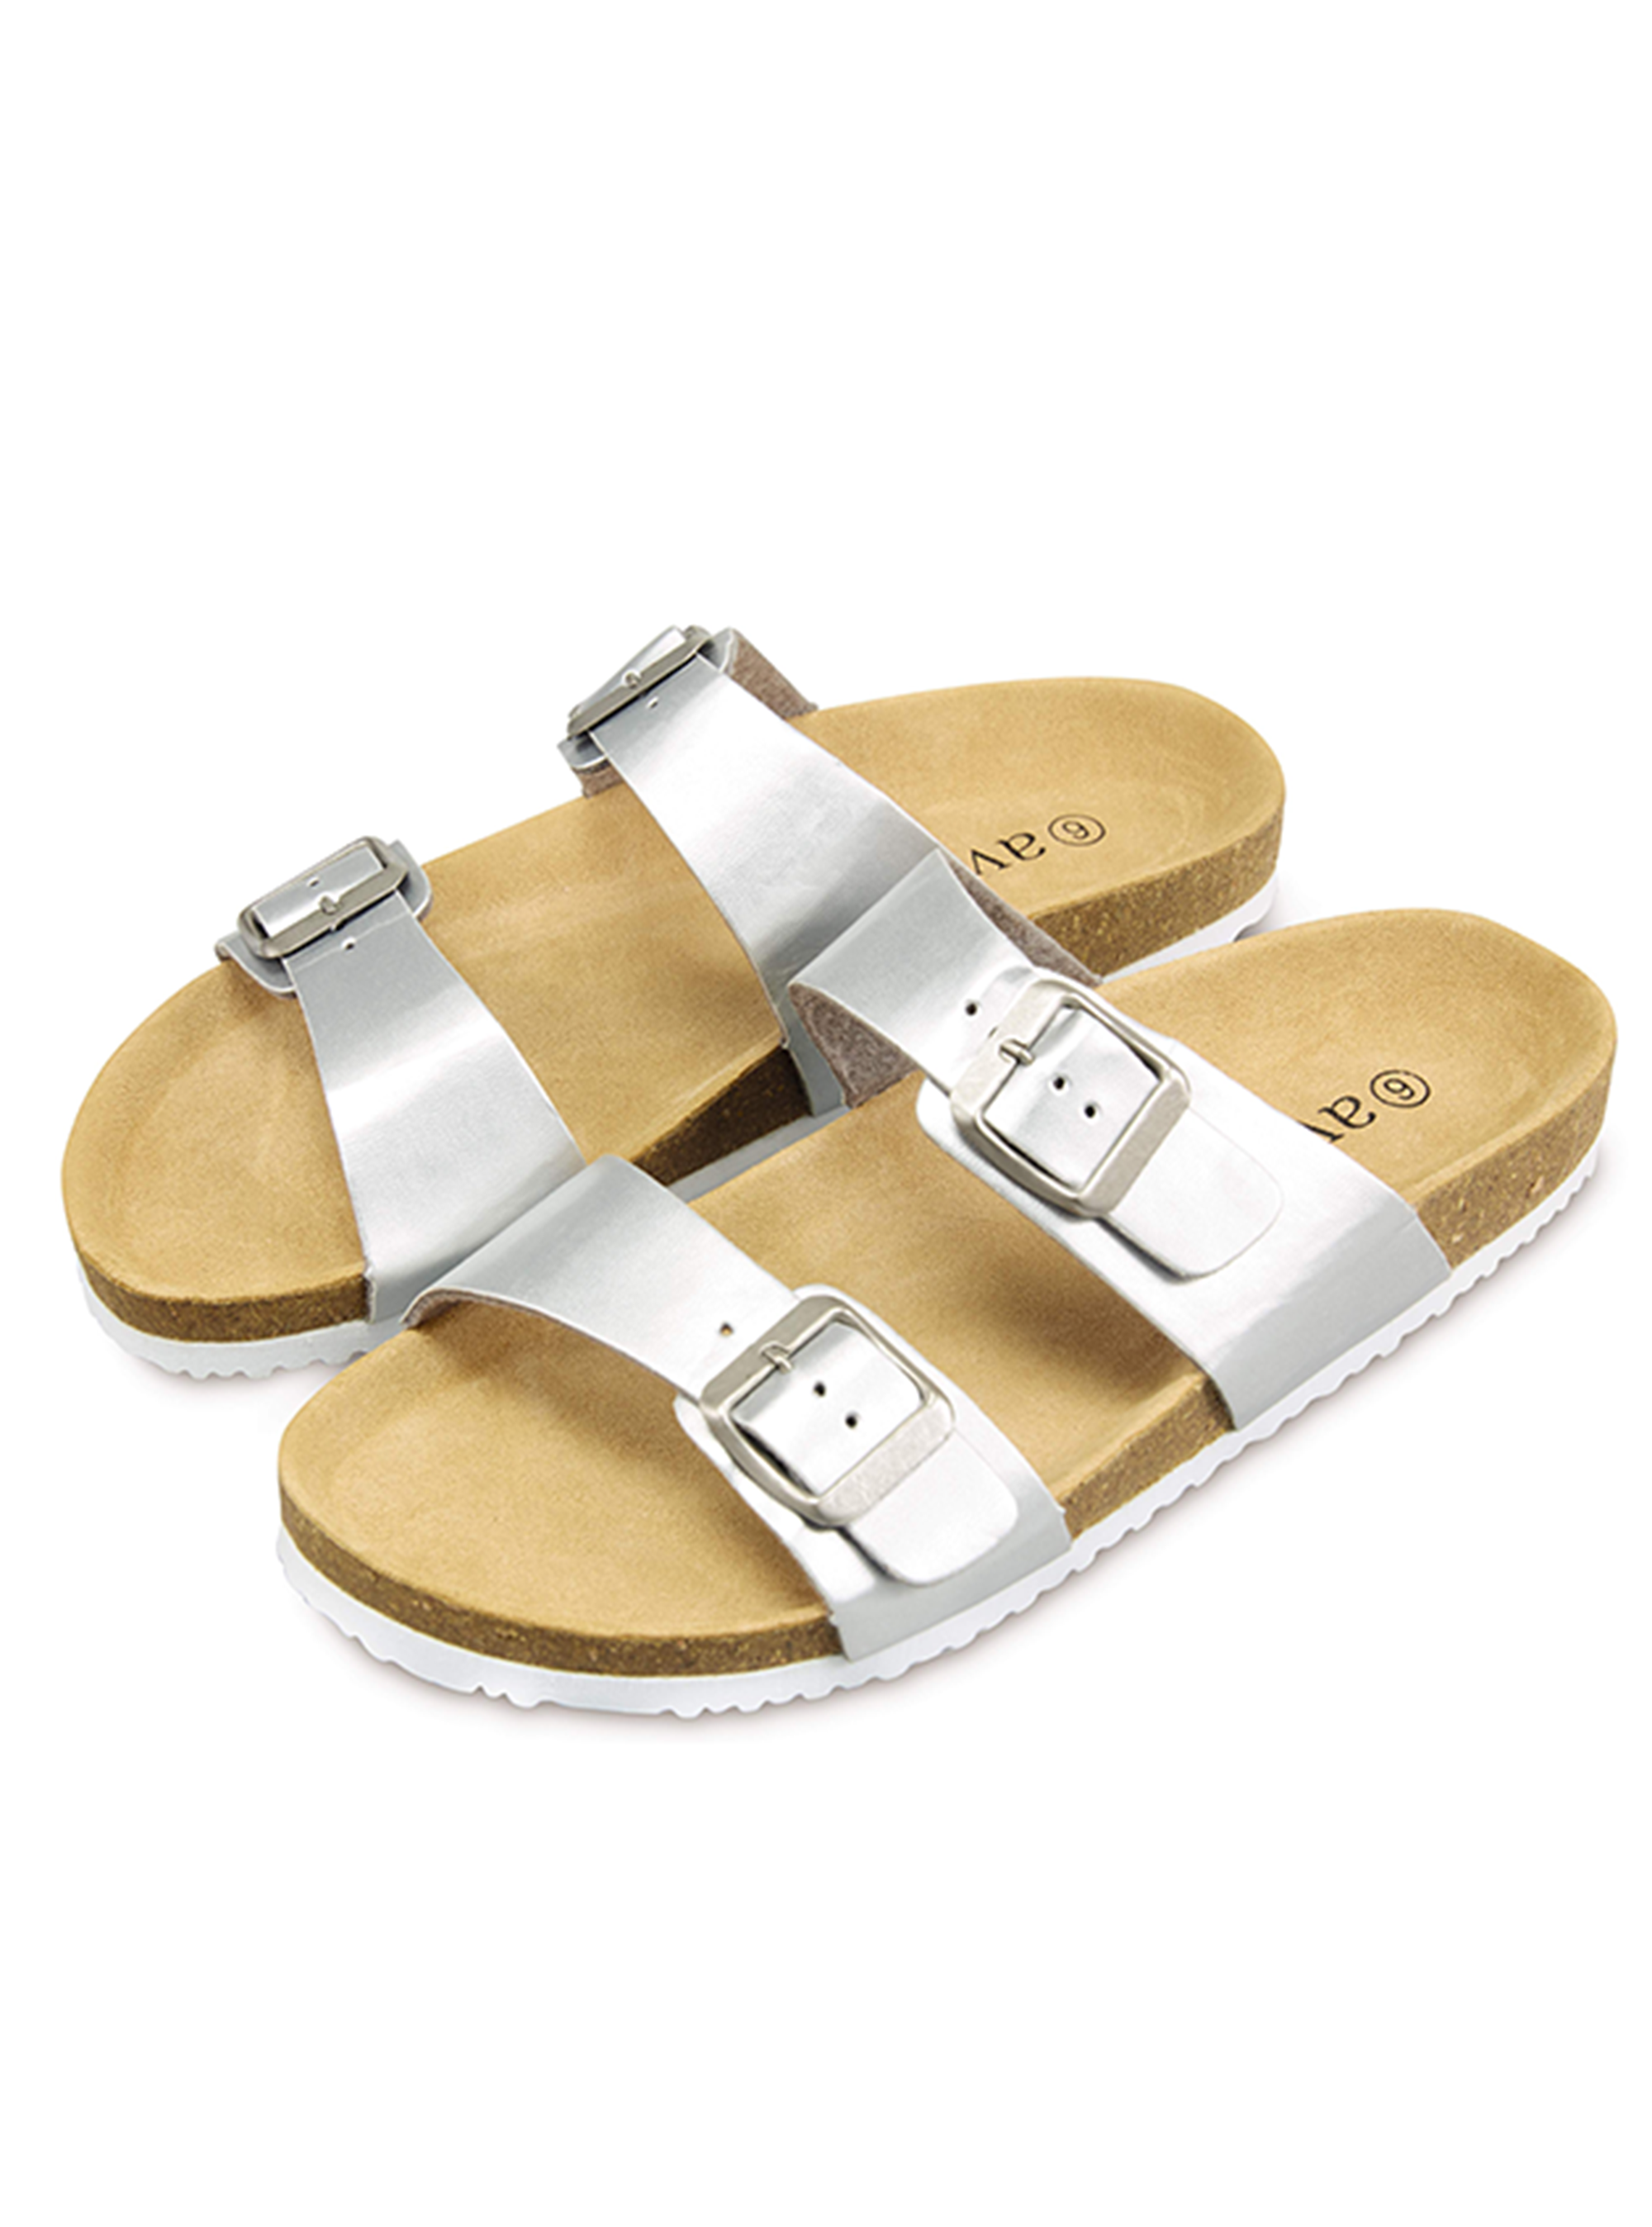 The Aldi Sandals That Look Just Like 